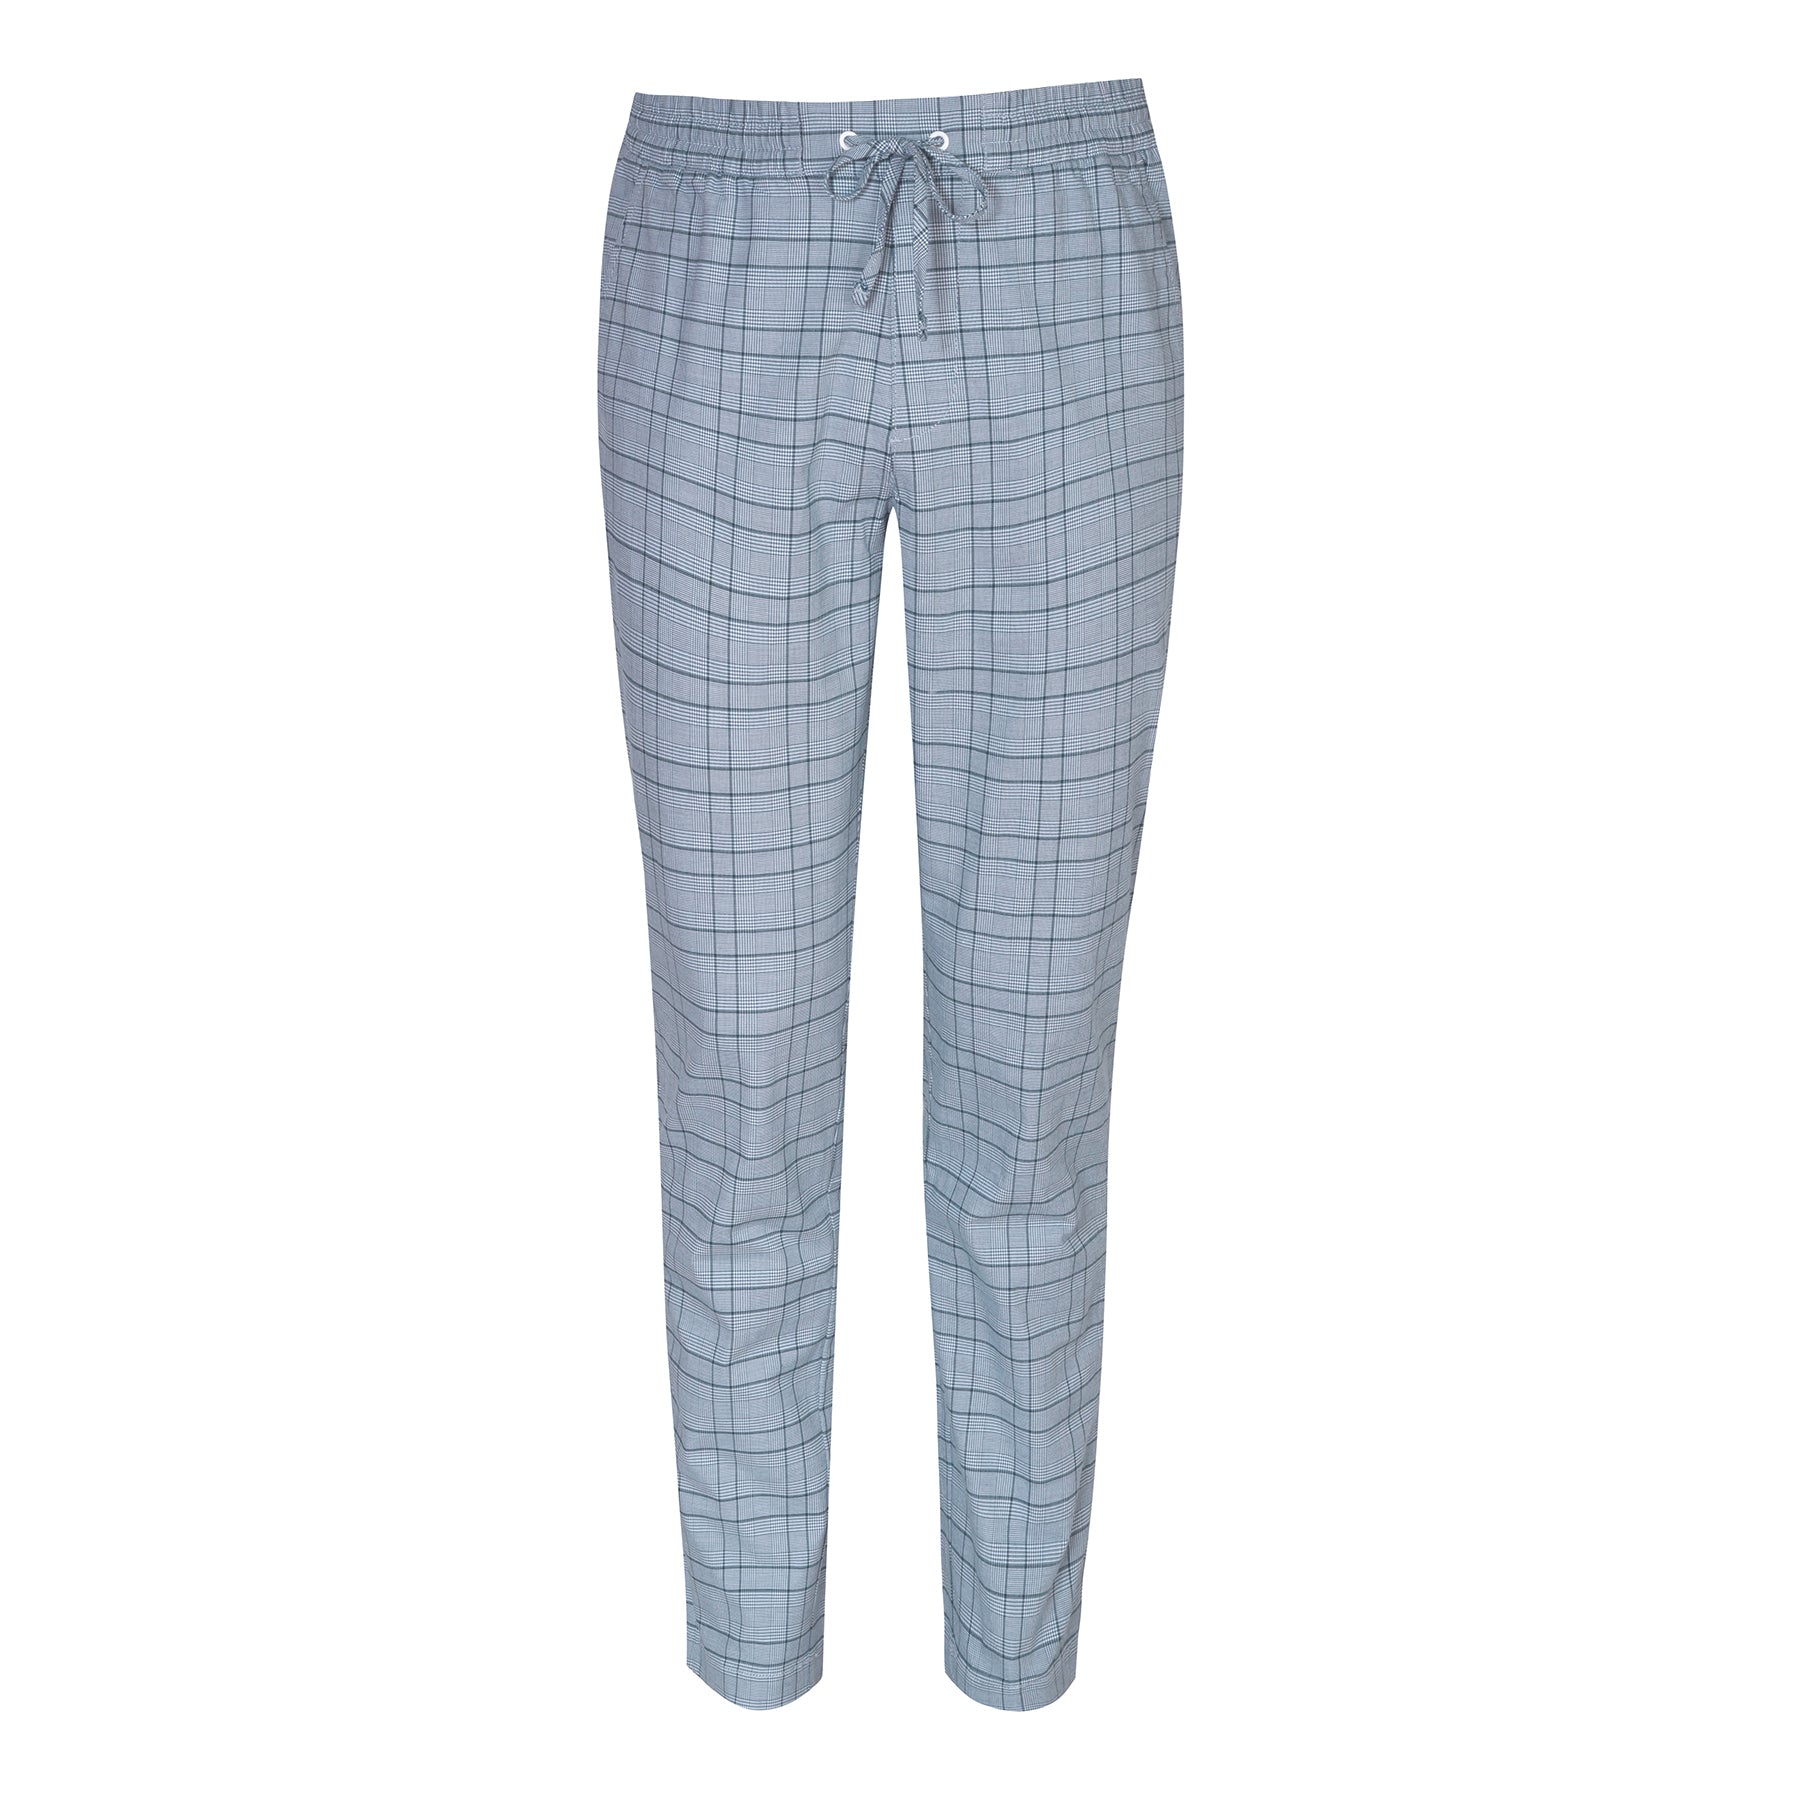 View Plaid Stretch Joggers In Bering Sea information